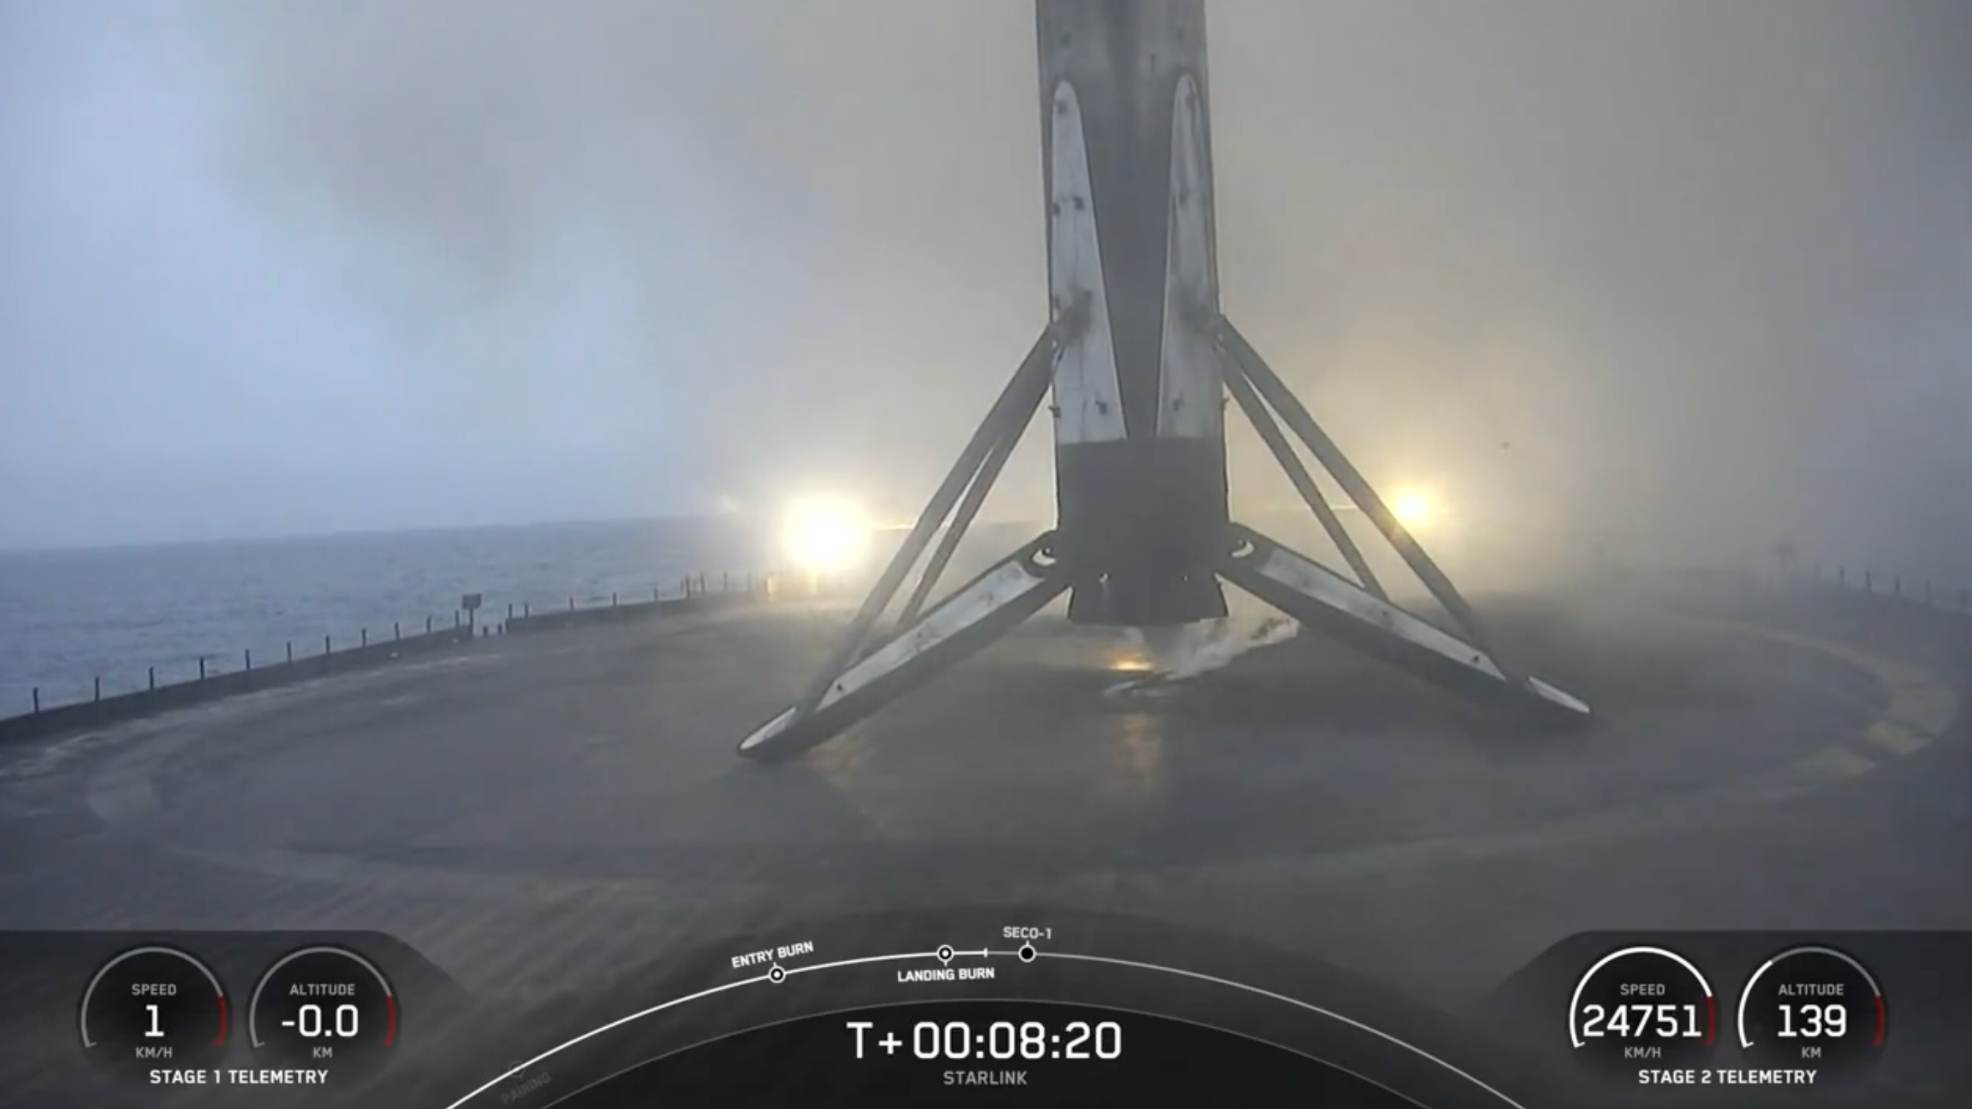 SpaceX launches to ISS are below impartial NASA assessment after uncommon Falcon 9 rocket failure